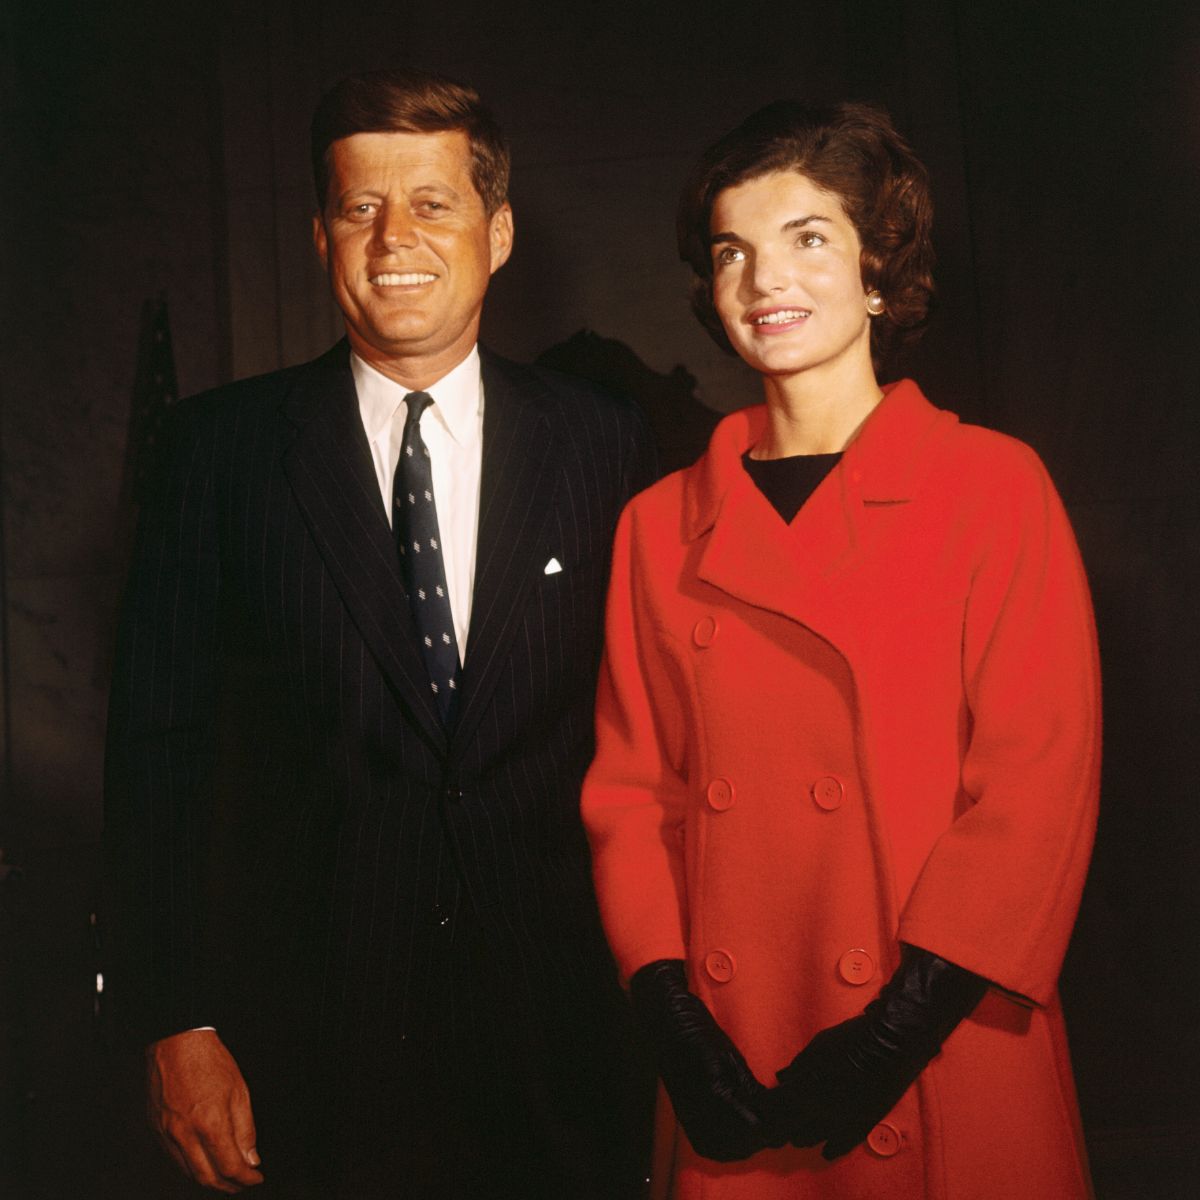 Is rep Auchincloss related to Jackie Kennedy